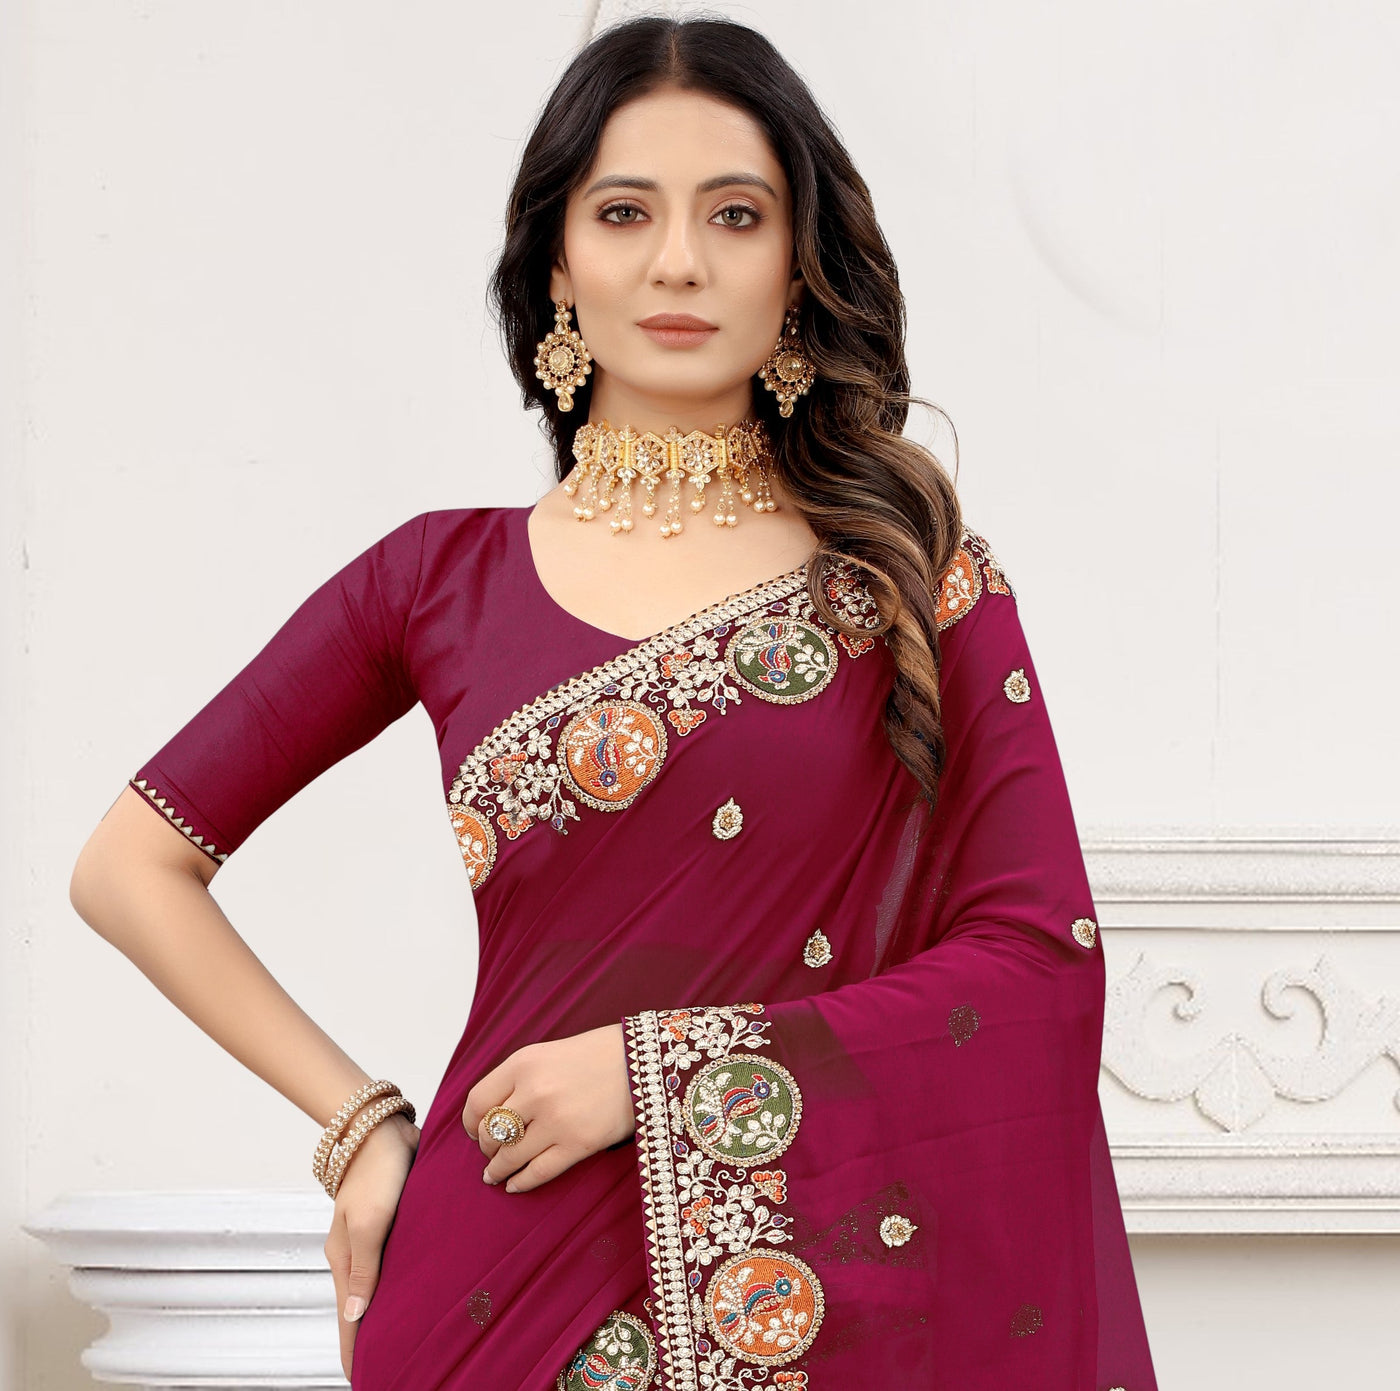 Magenta Georgette Embroidered Saree With Blouse